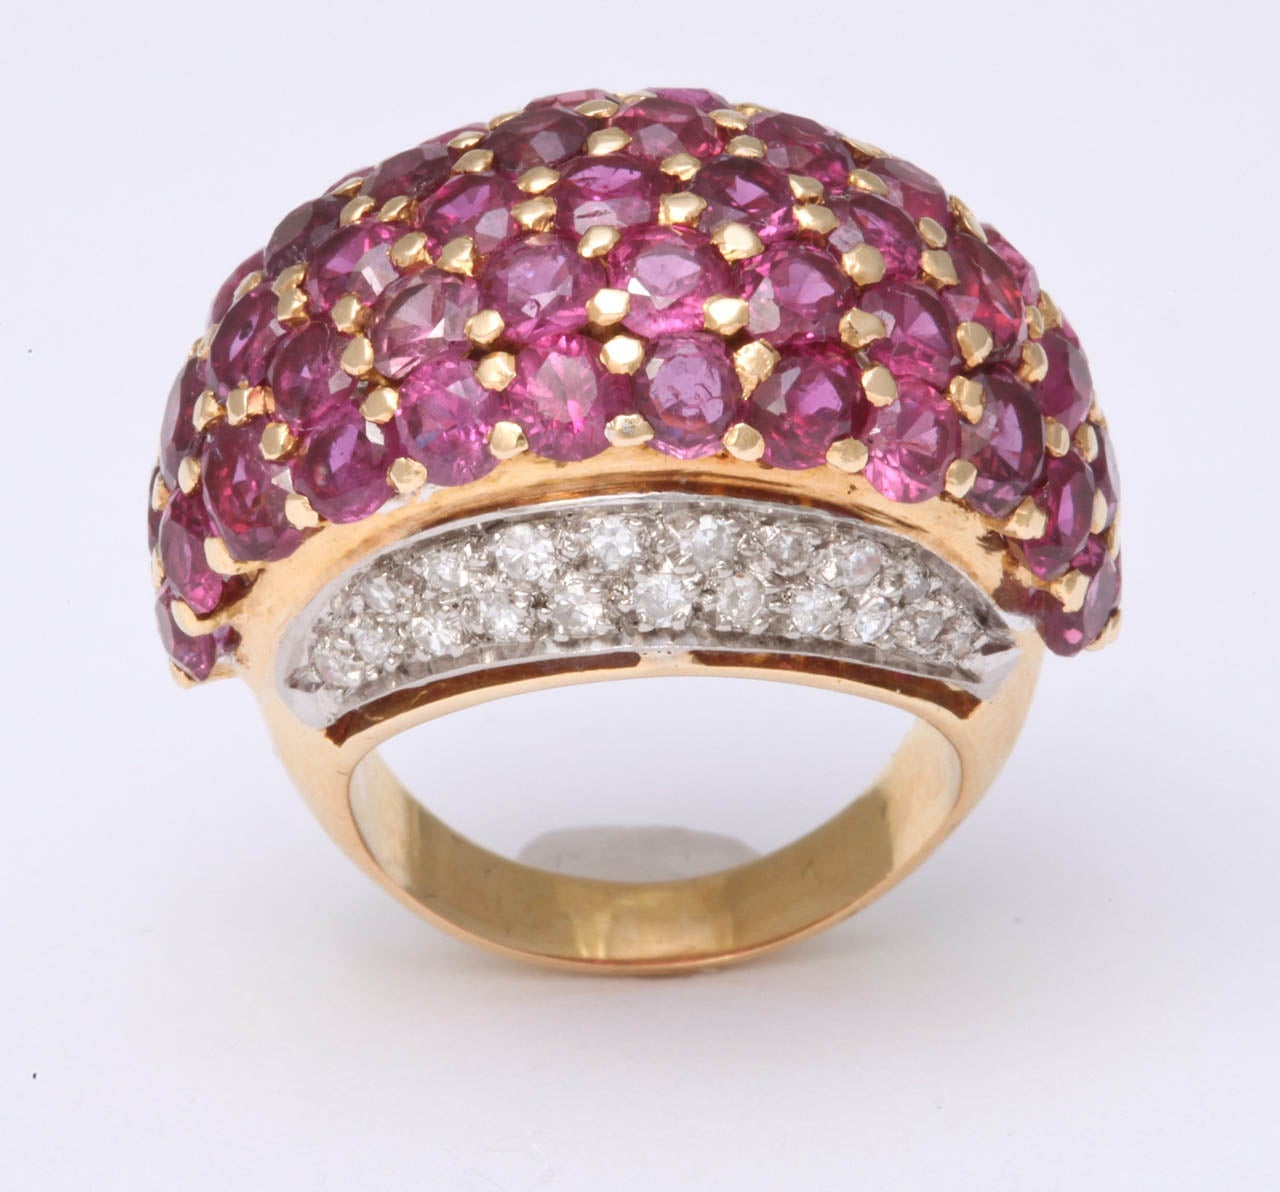 18Kt Yellow Gold Dome Ring.  Center set with faceted Rubies, prong set with sides , pave set, with full cut Diamonds. Approximately 2 cts of Diamonds & 5cts of Rubies.  Very chic & high style. Set in Rose Gold & Platinum.  The perfect Pinky Ring.